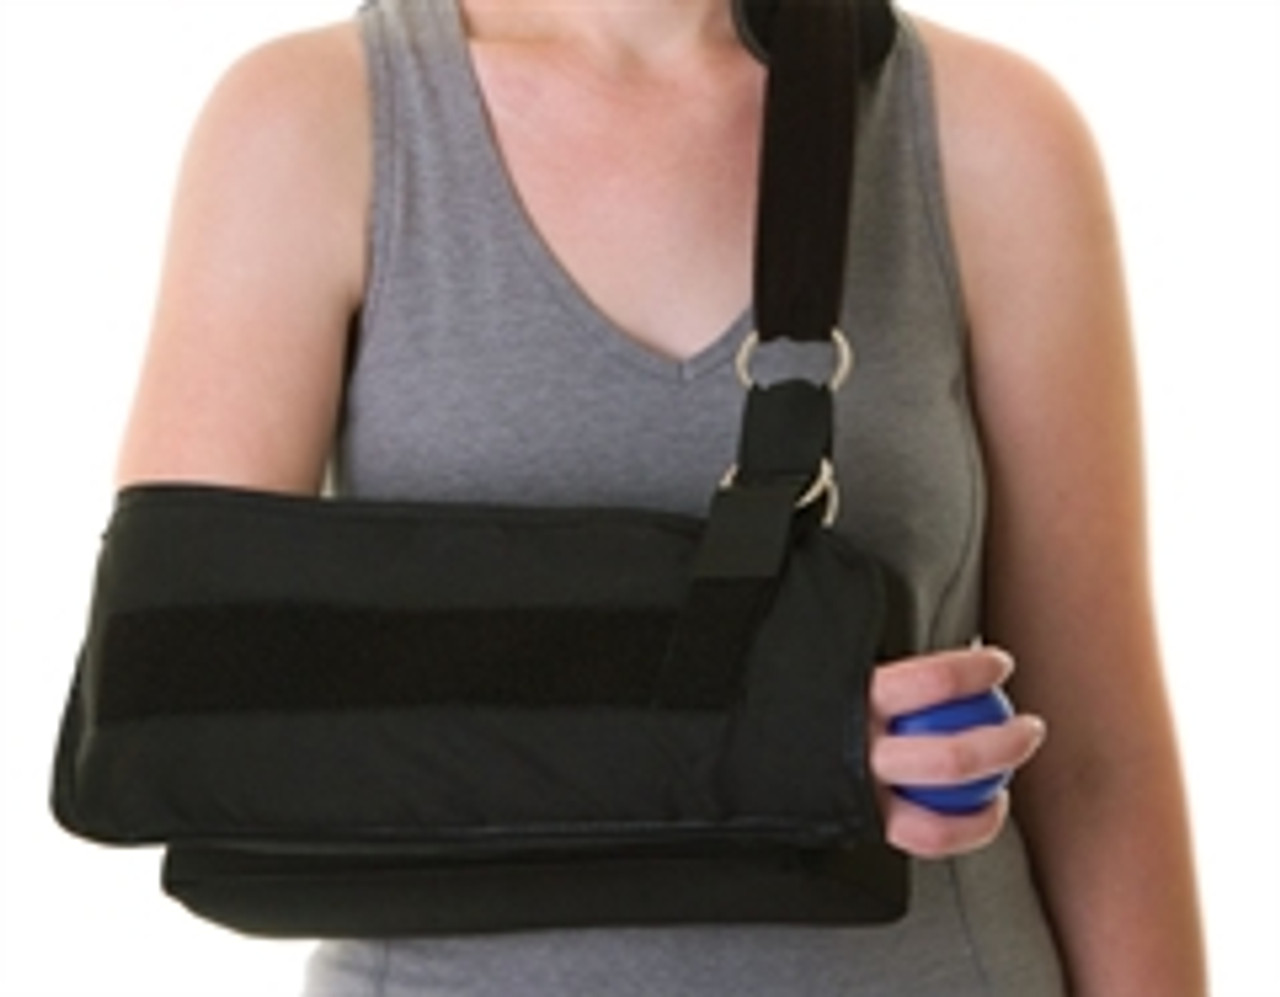 HIP ABDUCTION PILLOW - Mobility Caring